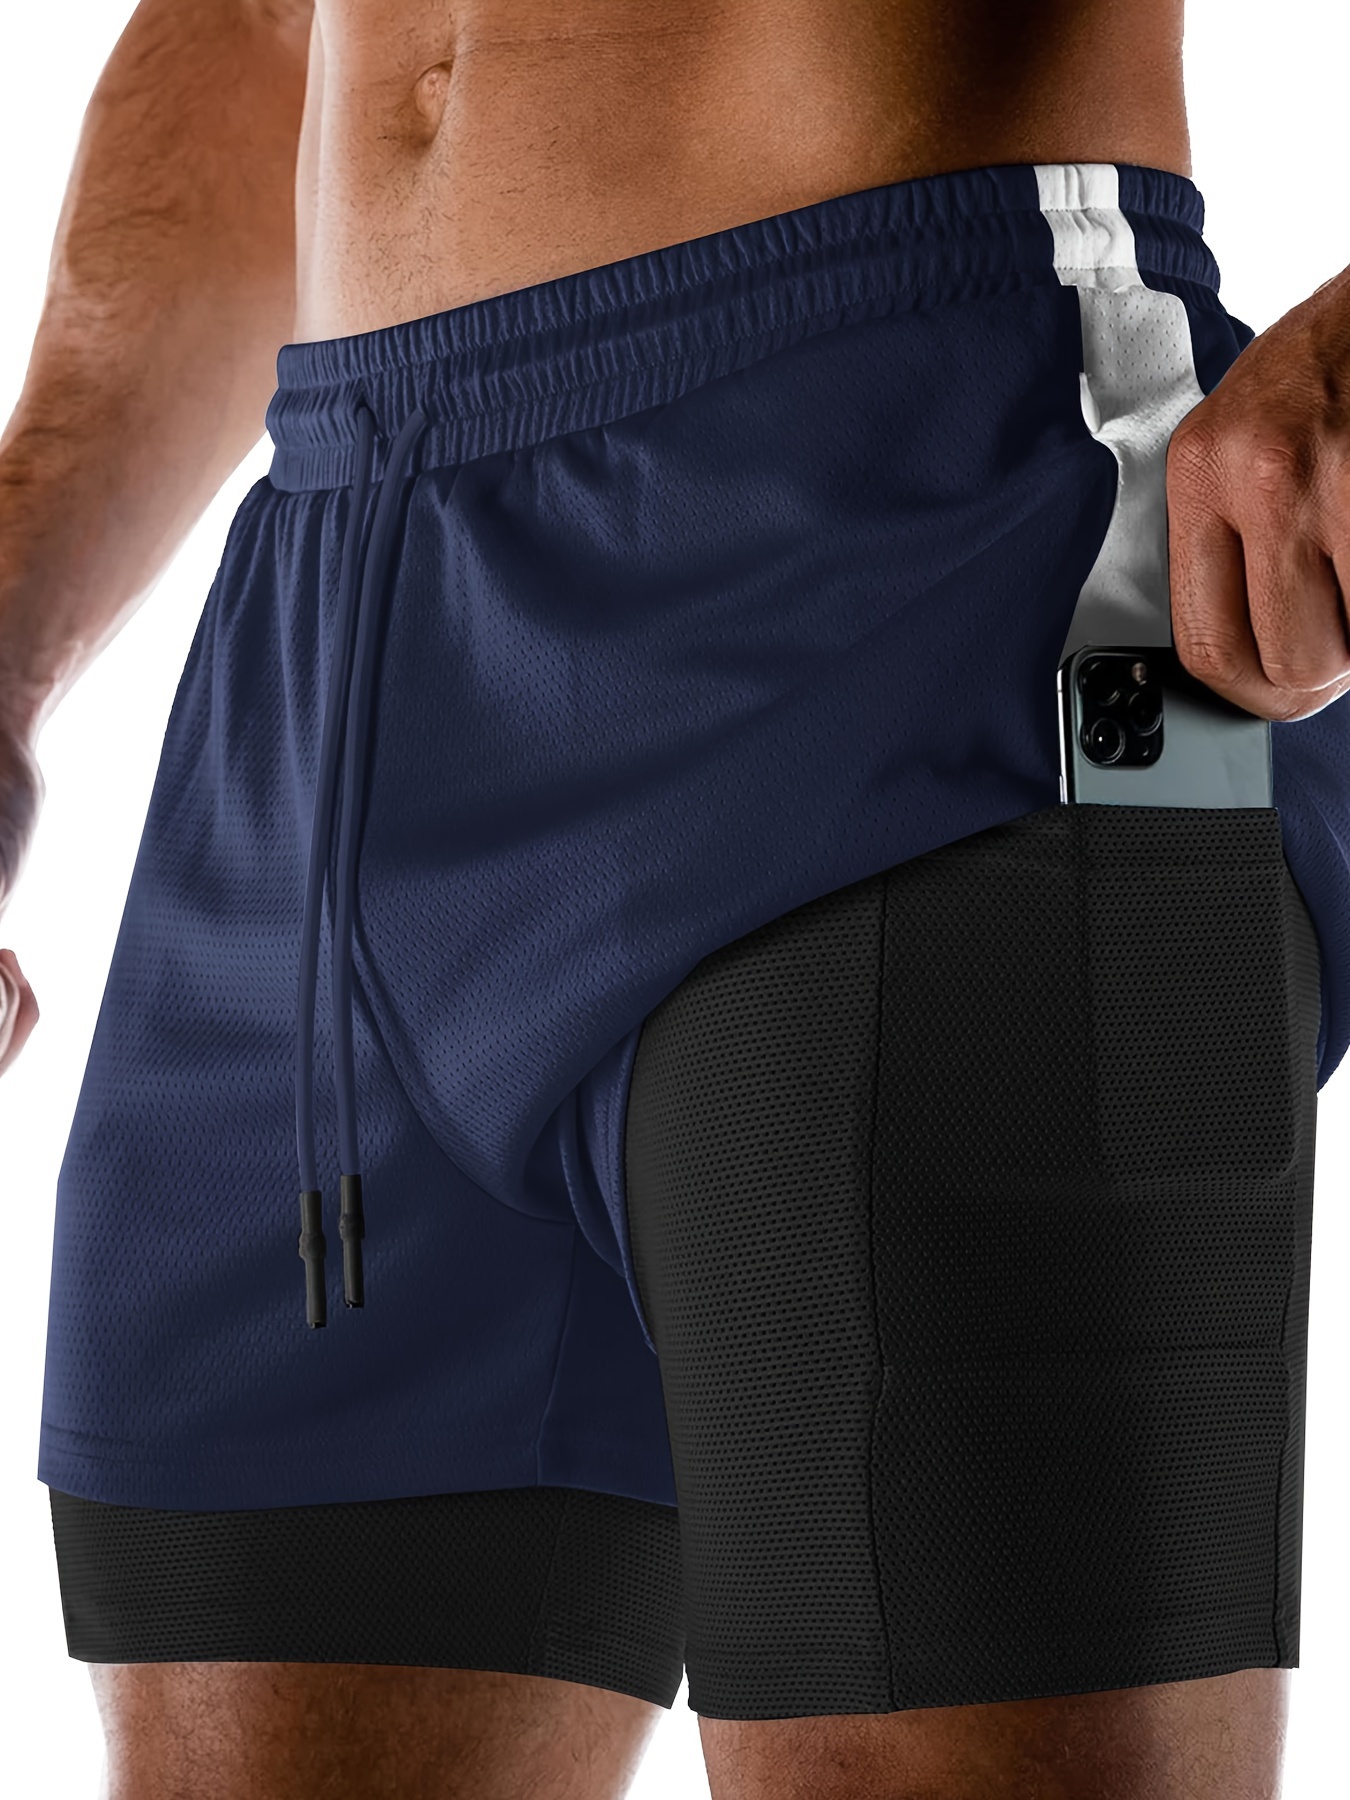 Mens Gym Running Shorts Athletic Workout Clothes For Men Quick-Dry Shorts  With Zipper Pockets